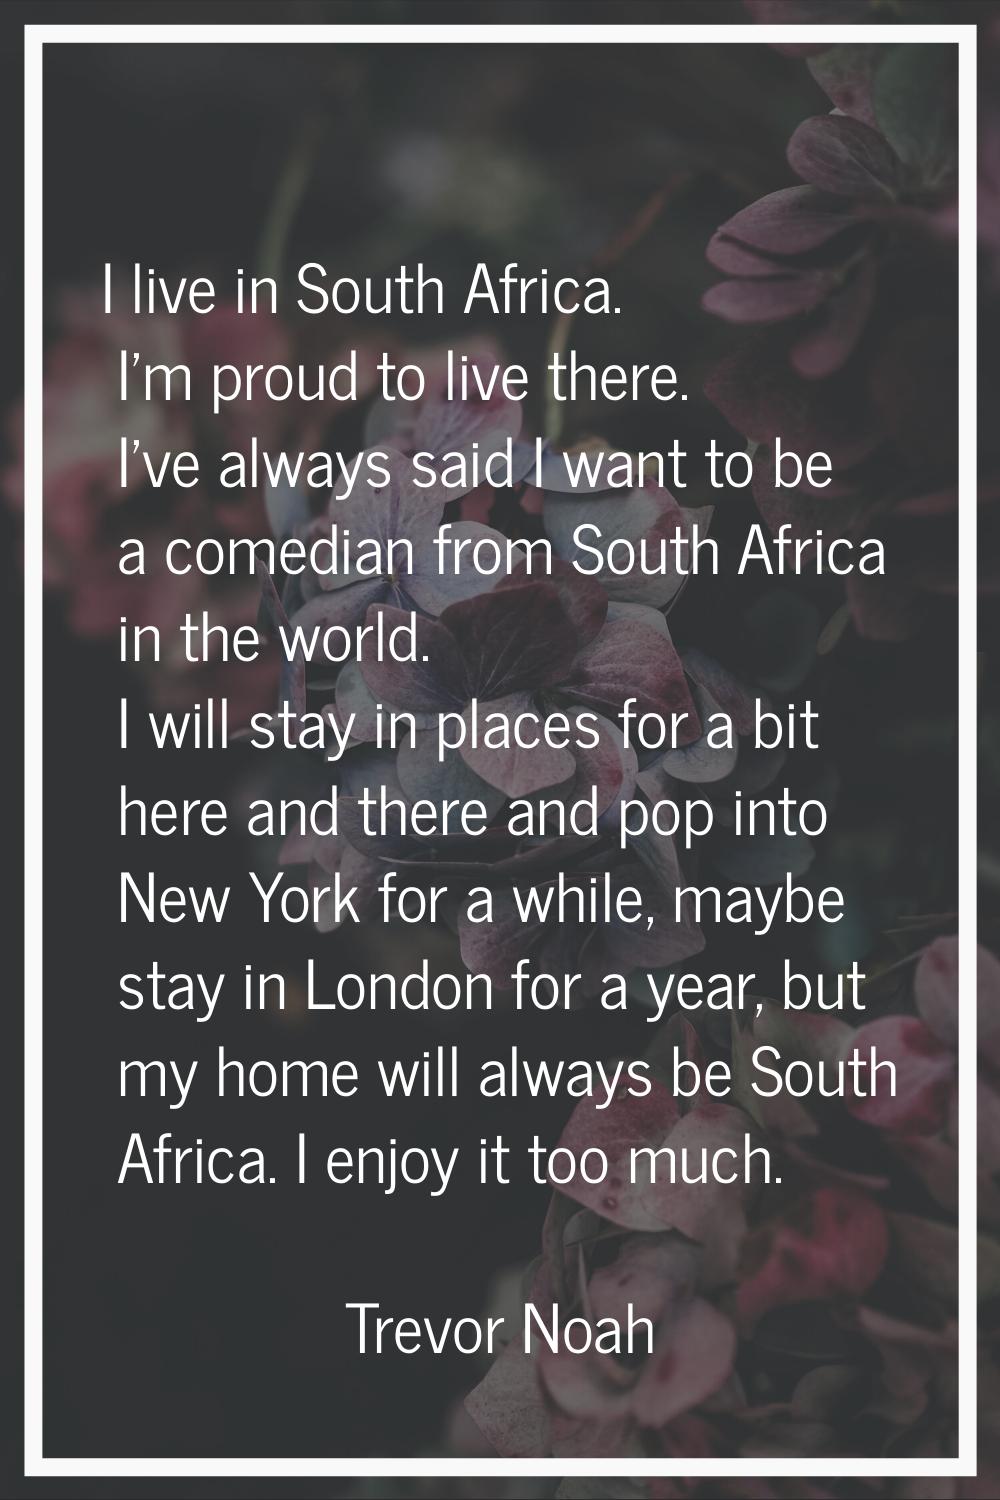 I live in South Africa. I'm proud to live there. I've always said I want to be a comedian from Sout